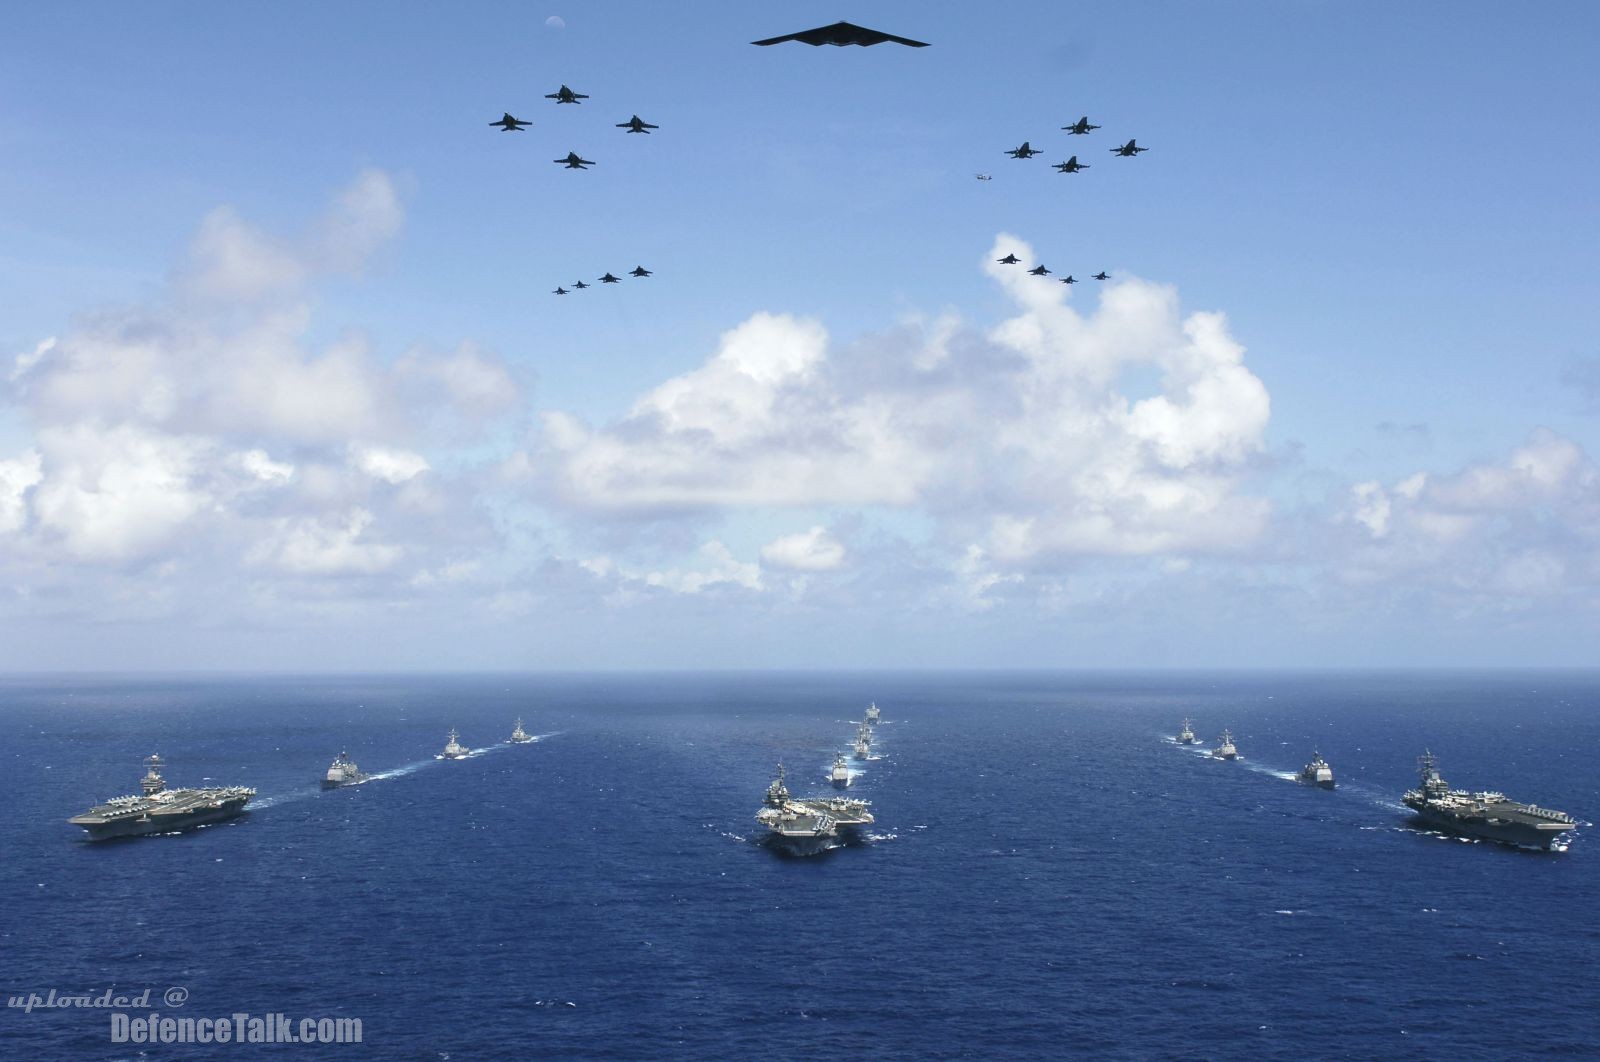 Carrier Strike Groups sail in formation - Valiant Shield 2006.